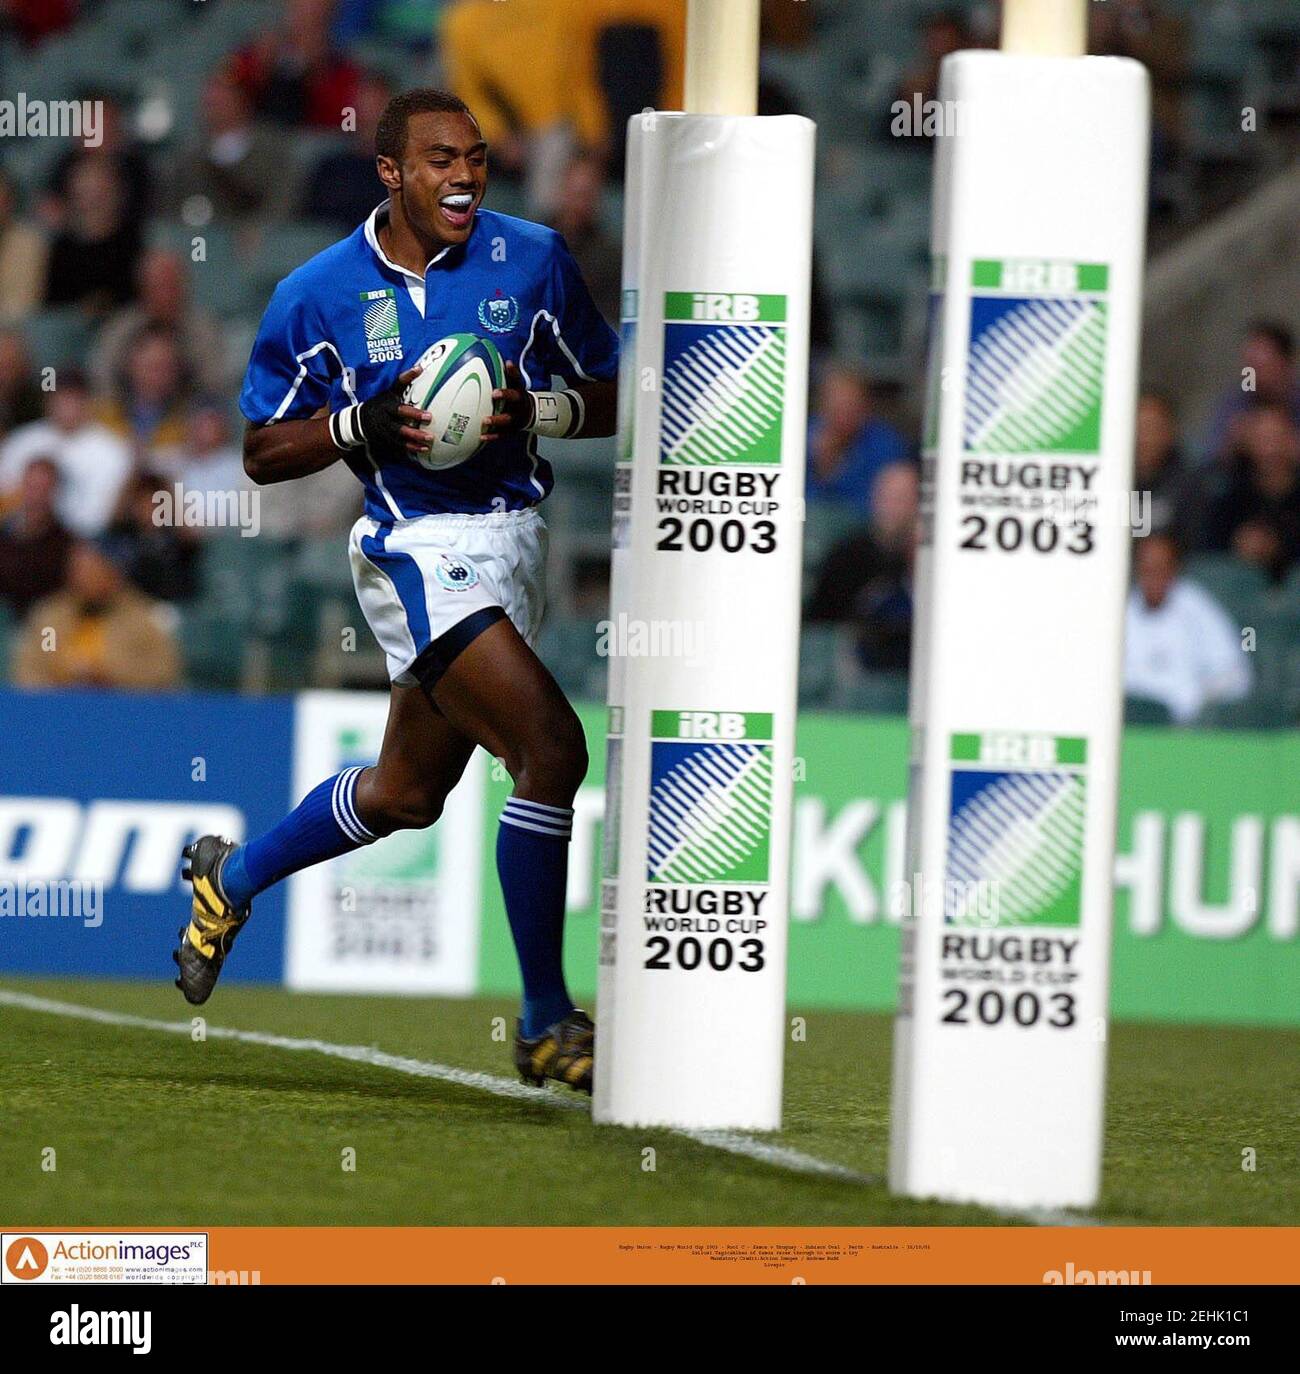 Rugby Union - Rugby World Cup 2003 - Pool C - Samoa v Uruguay - Subiaco Oval , Perth - Australia - 15/10/03  Sailosi Tagicakibau of Samoa races through to score a try  Mandatory Credit:Action Images / Andrew Budd  Livepic Stock Photo